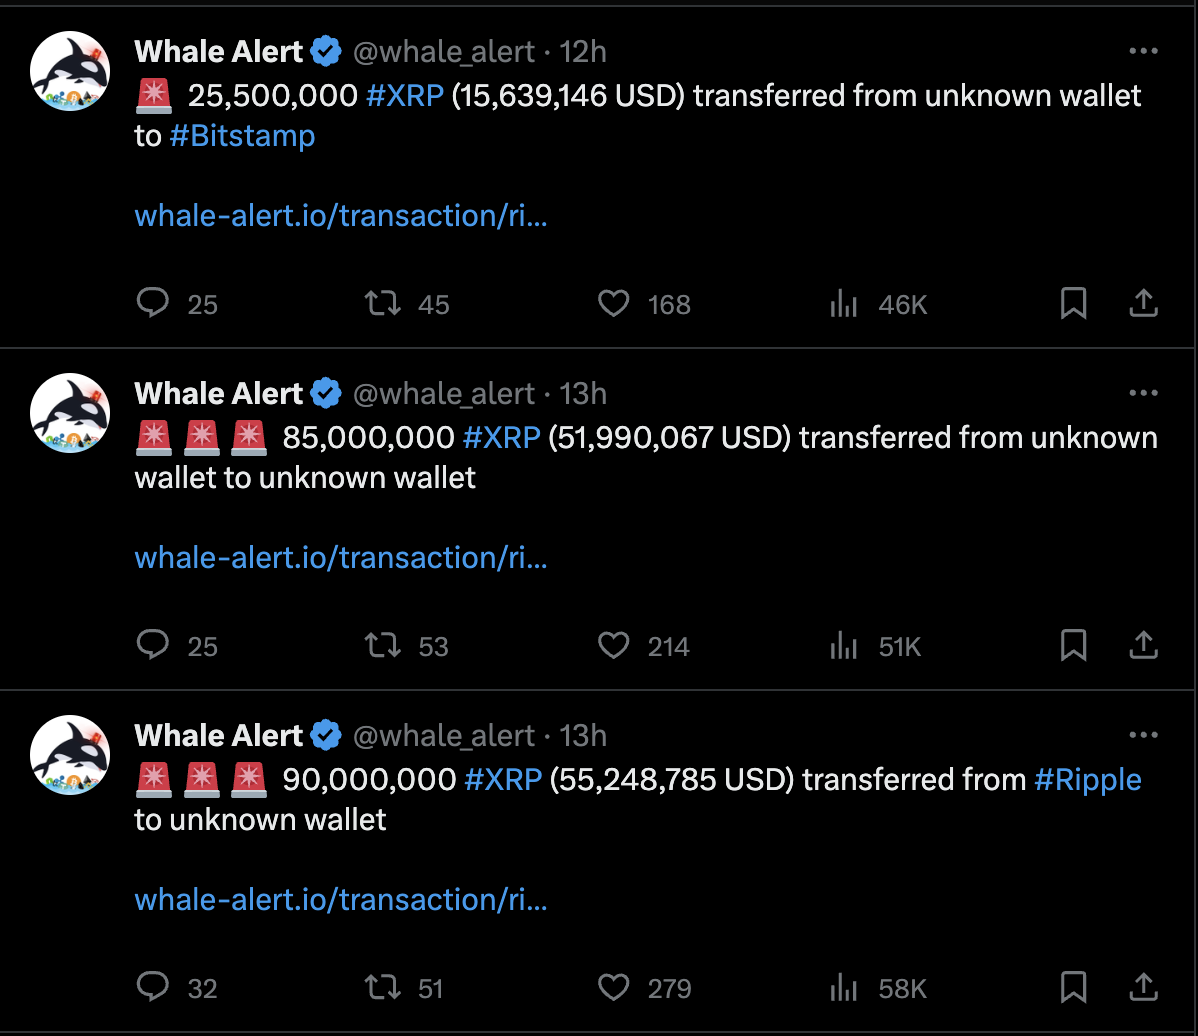 Whale Alert Posts Large XRP Transactions